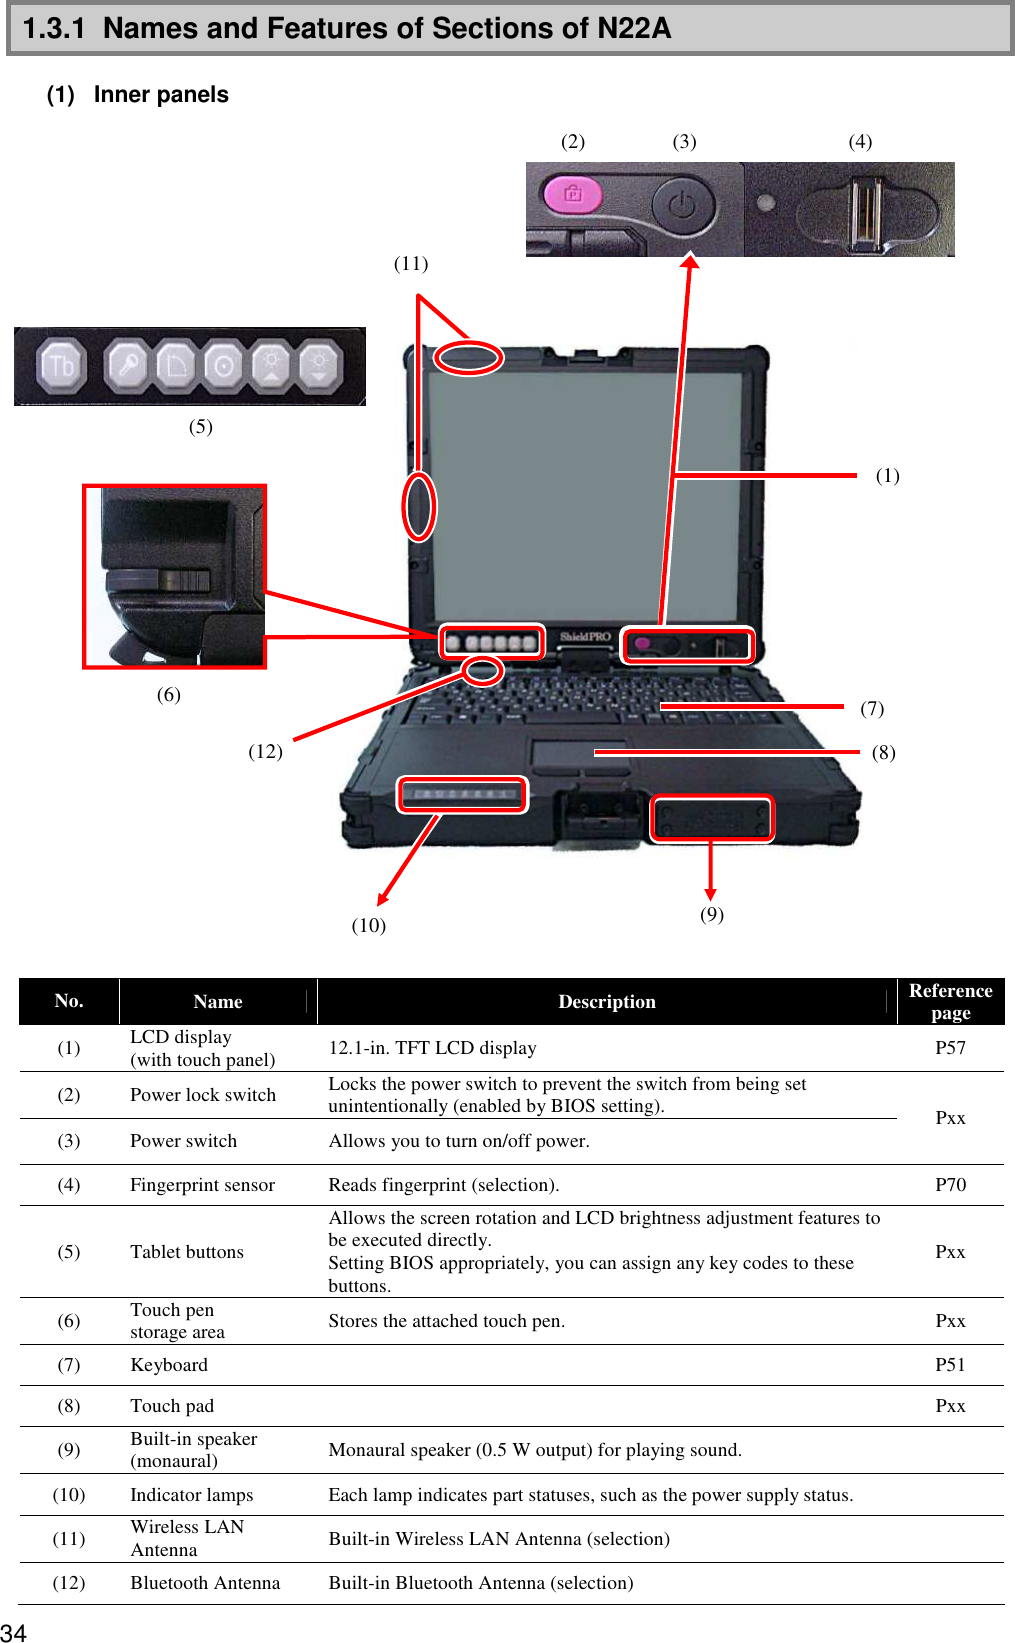 34 1.3.1  Names and Features of Sections of N22A  (1)  Inner panels                                  No.  Name  Description  Reference page (1)  LCD display (with touch panel)  12.1-in. TFT LCD display  P57 (2)  Power lock switch  Locks the power switch to prevent the switch from being set unintentionally (enabled by BIOS setting). (3)  Power switch  Allows you to turn on/off power. Pxx (4)  Fingerprint sensor  Reads fingerprint (selection).  P70 (5)  Tablet buttons Allows the screen rotation and LCD brightness adjustment features to be executed directly. Setting BIOS appropriately, you can assign any key codes to these buttons. Pxx (6)  Touch pen storage area  Stores the attached touch pen.  Pxx (7)  Keyboard    P51 (8)  Touch pad    Pxx (9)  Built-in speaker (monaural)  Monaural speaker (0.5 W output) for playing sound.   (10)  Indicator lamps  Each lamp indicates part statuses, such as the power supply status.   (11)  Wireless LAN Antenna  Built-in Wireless LAN Antenna (selection)   (12)  Bluetooth Antenna  Built-in Bluetooth Antenna (selection)    (2) (3) (4) (5) (6) (7) (8) (10) (9)  (1) (12) (11) 